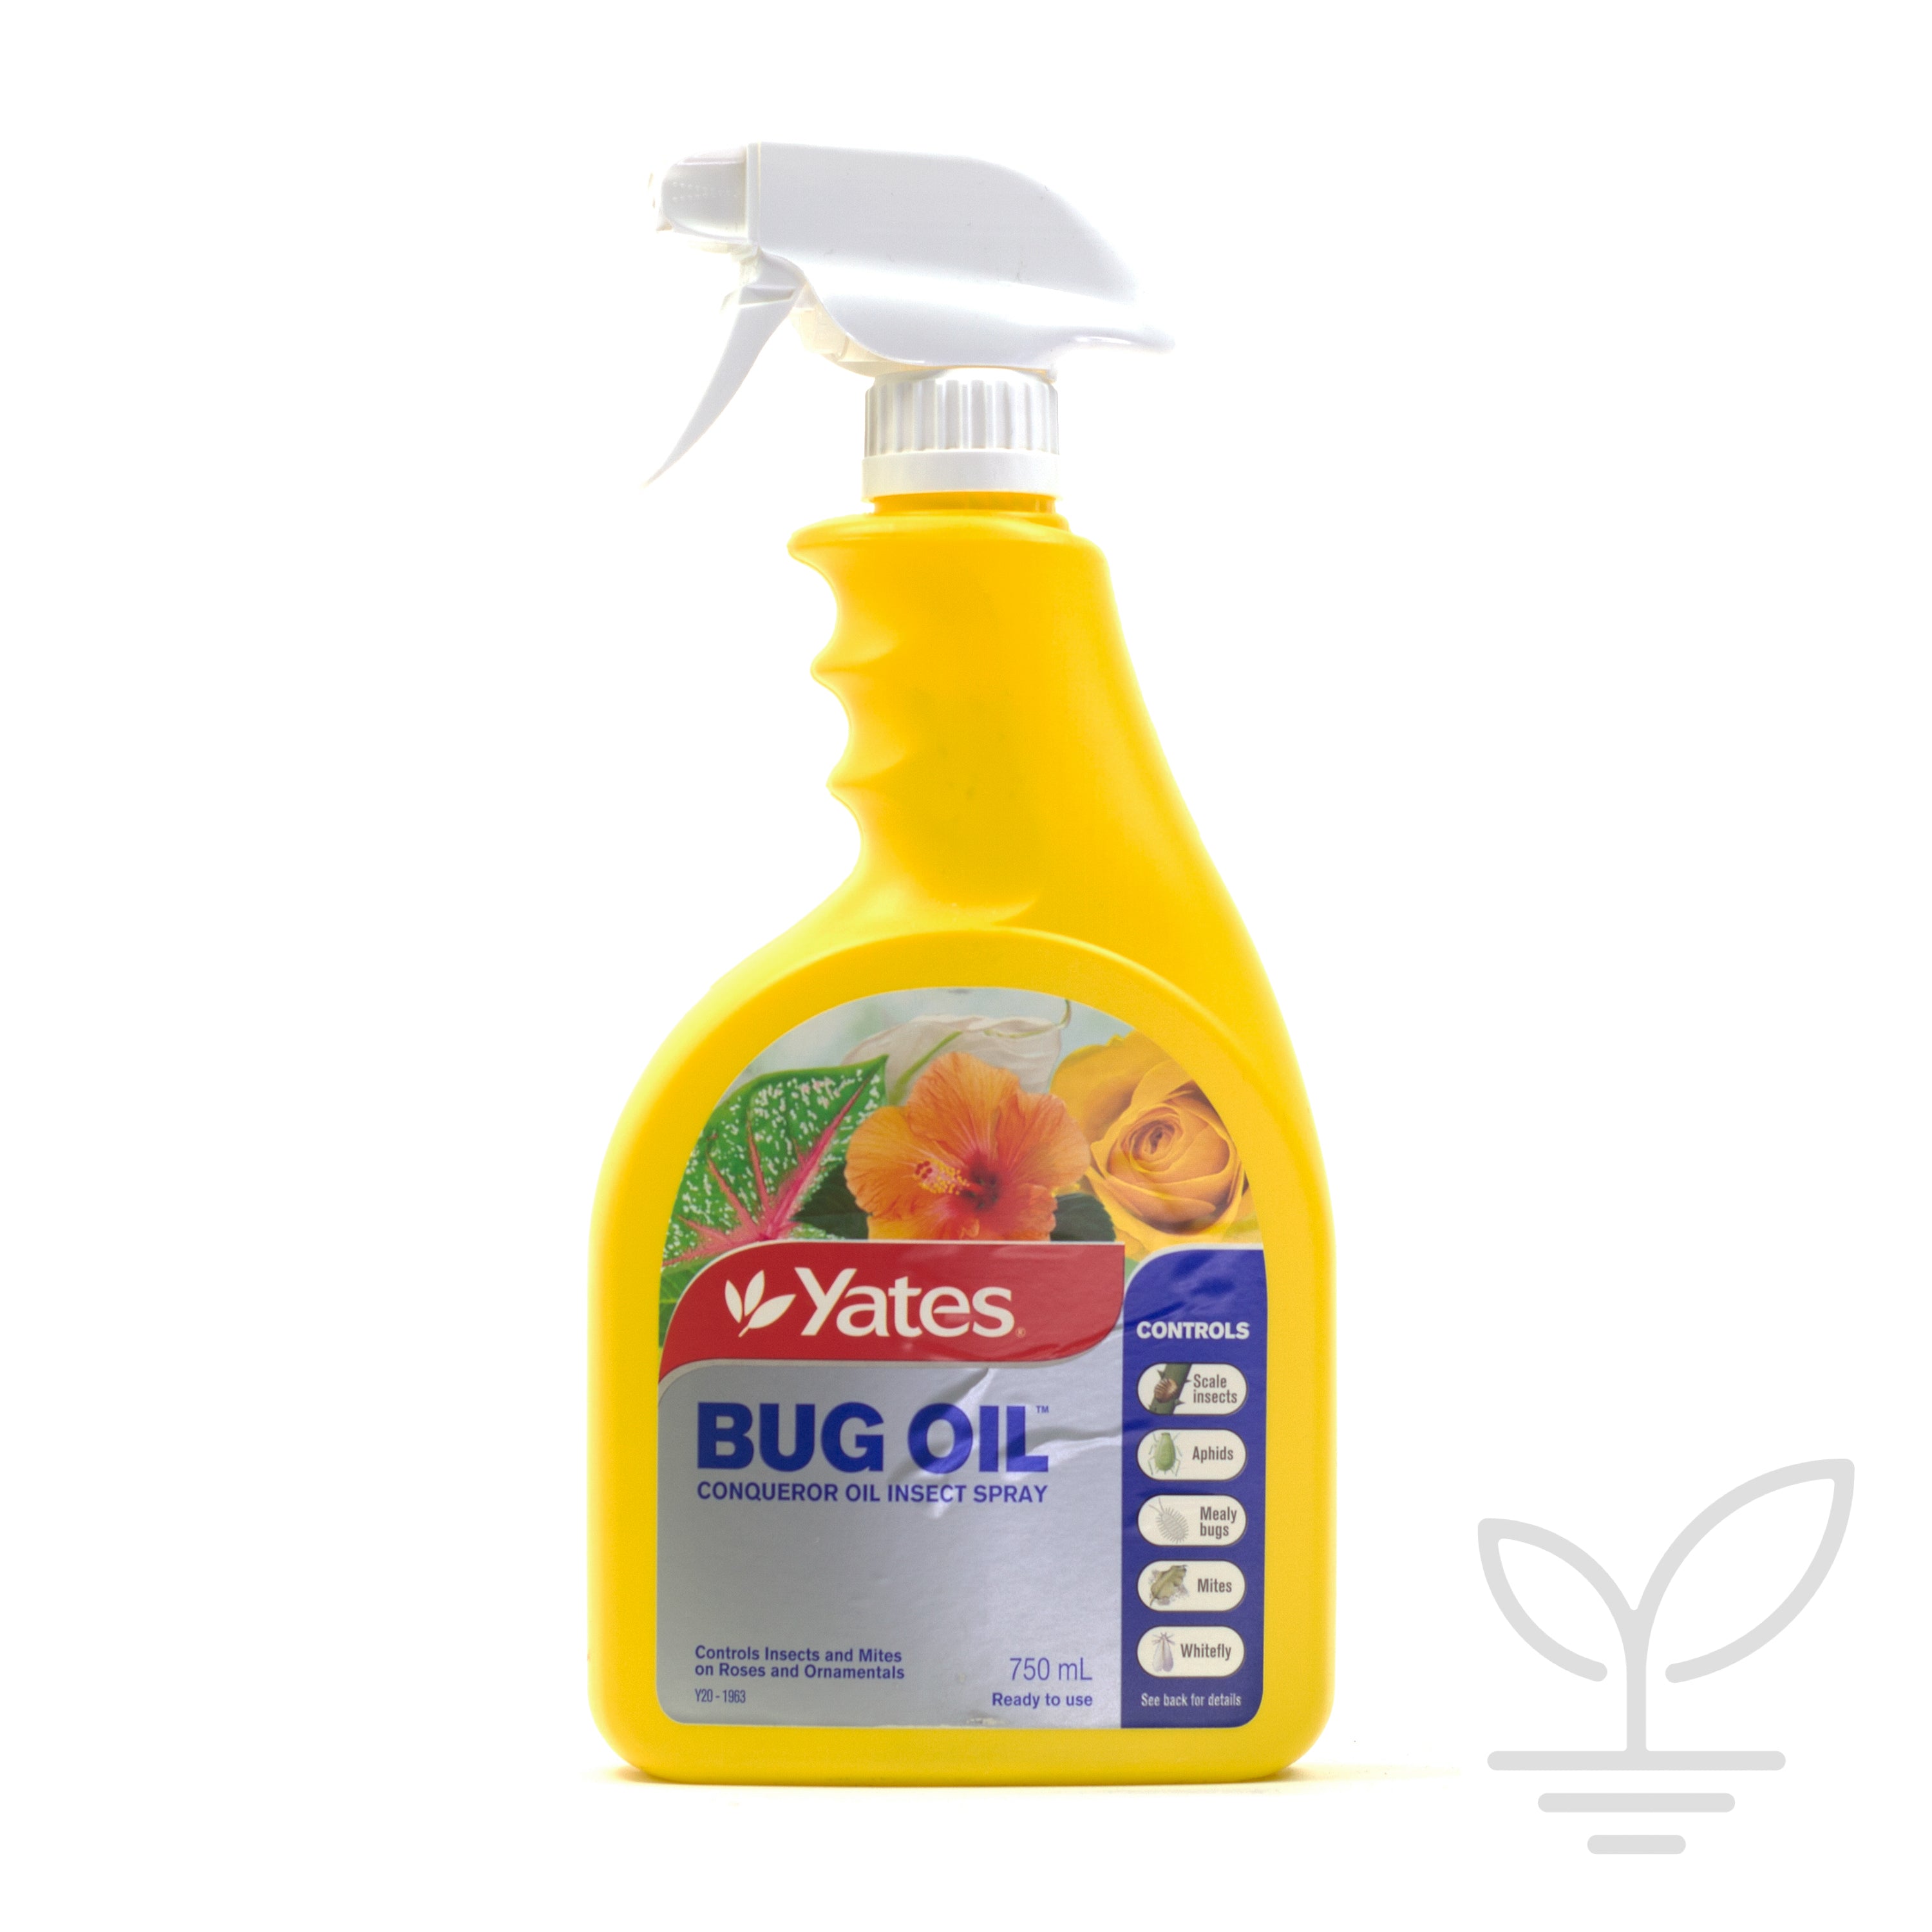 Yates Bug Oil Insect Spray - 750ml